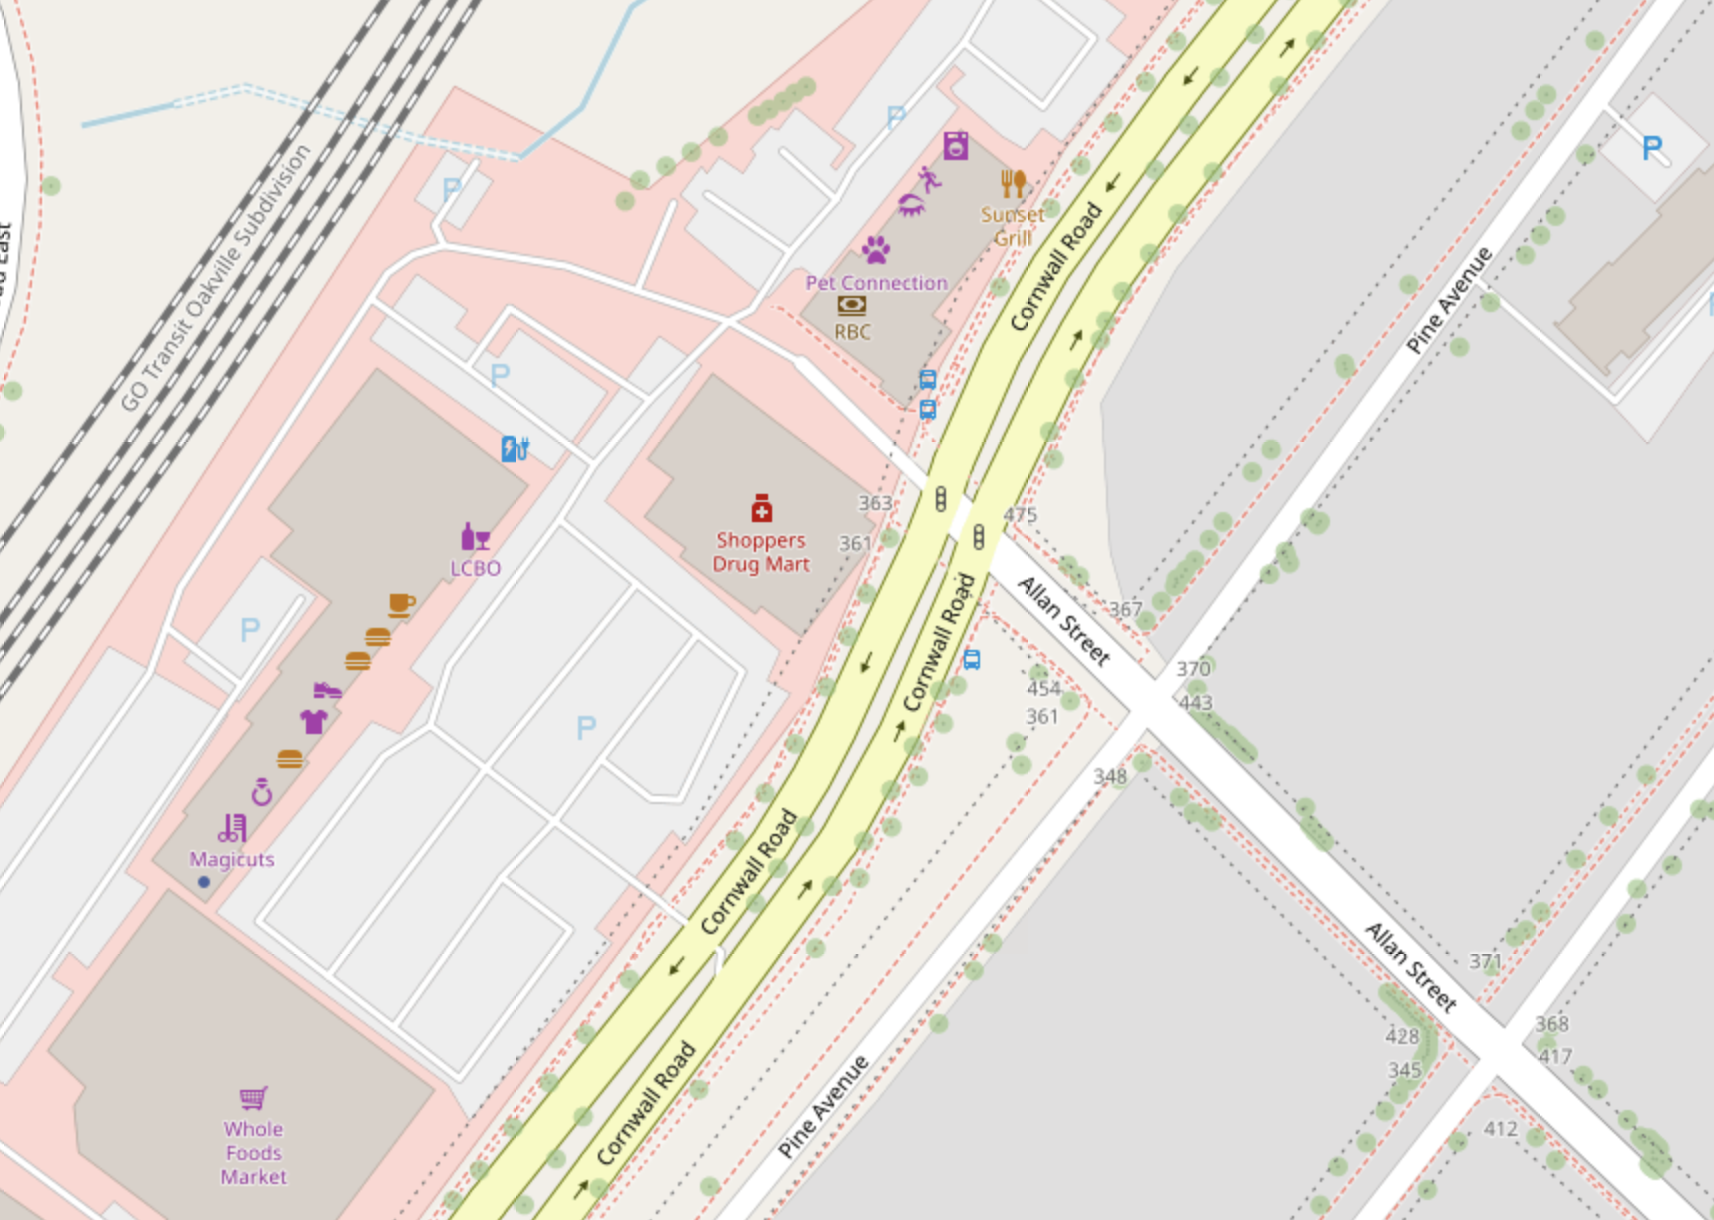 Shoppers Drug Mart on Cornwall Road. | Openstreetmap